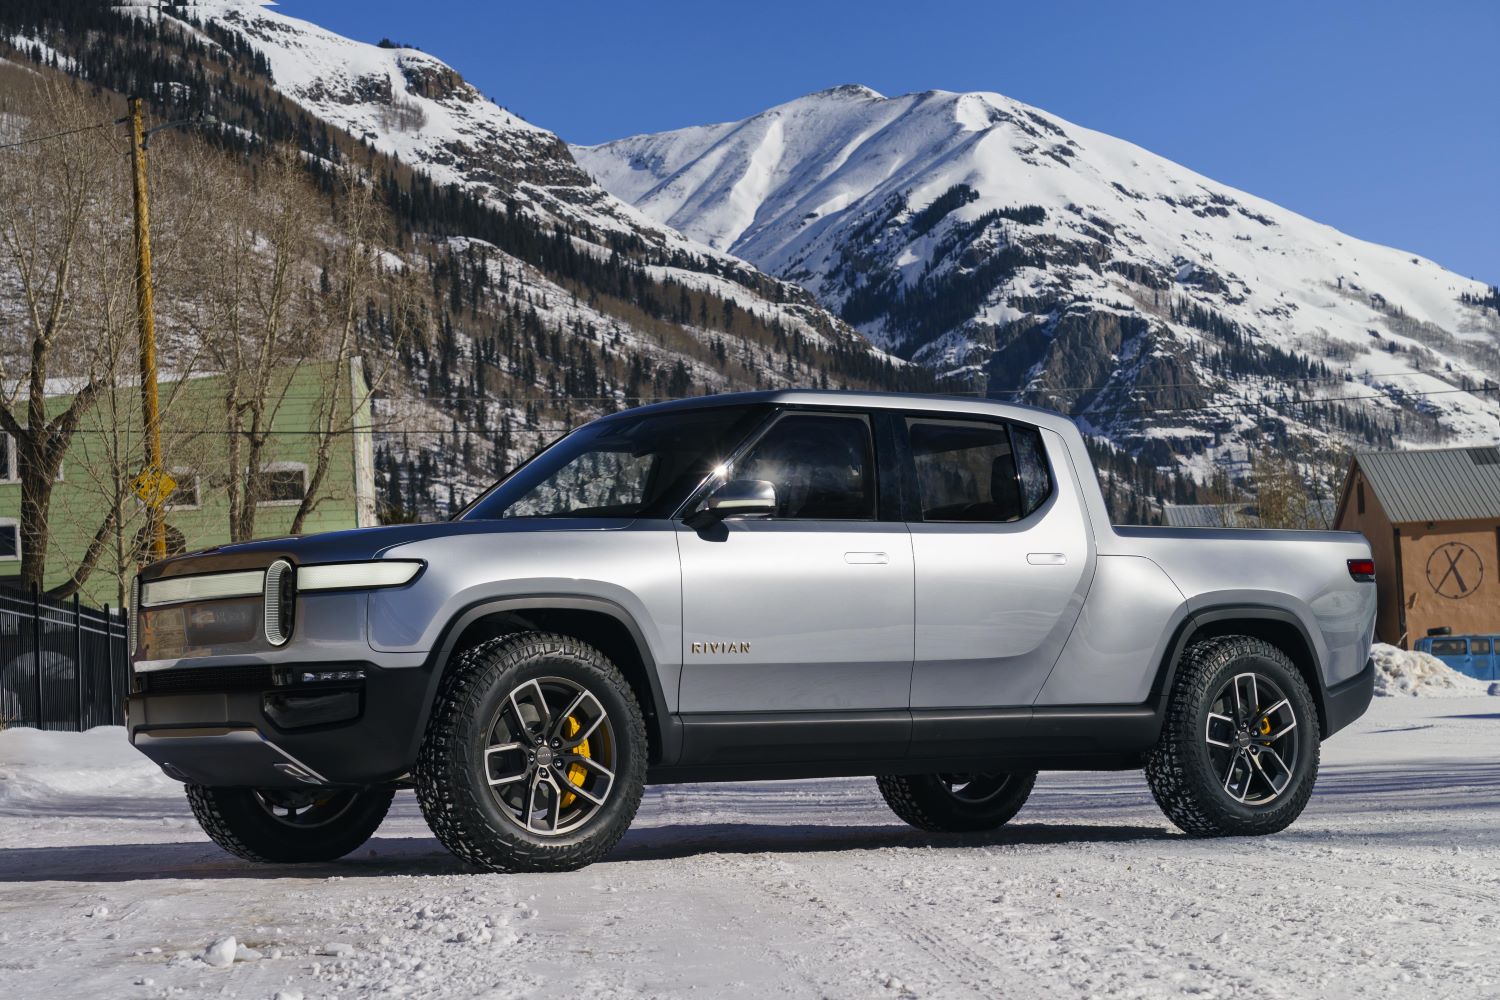 Rivian R1T Beats Ford Maverick For 2022 MotorTrend Truck of the Year